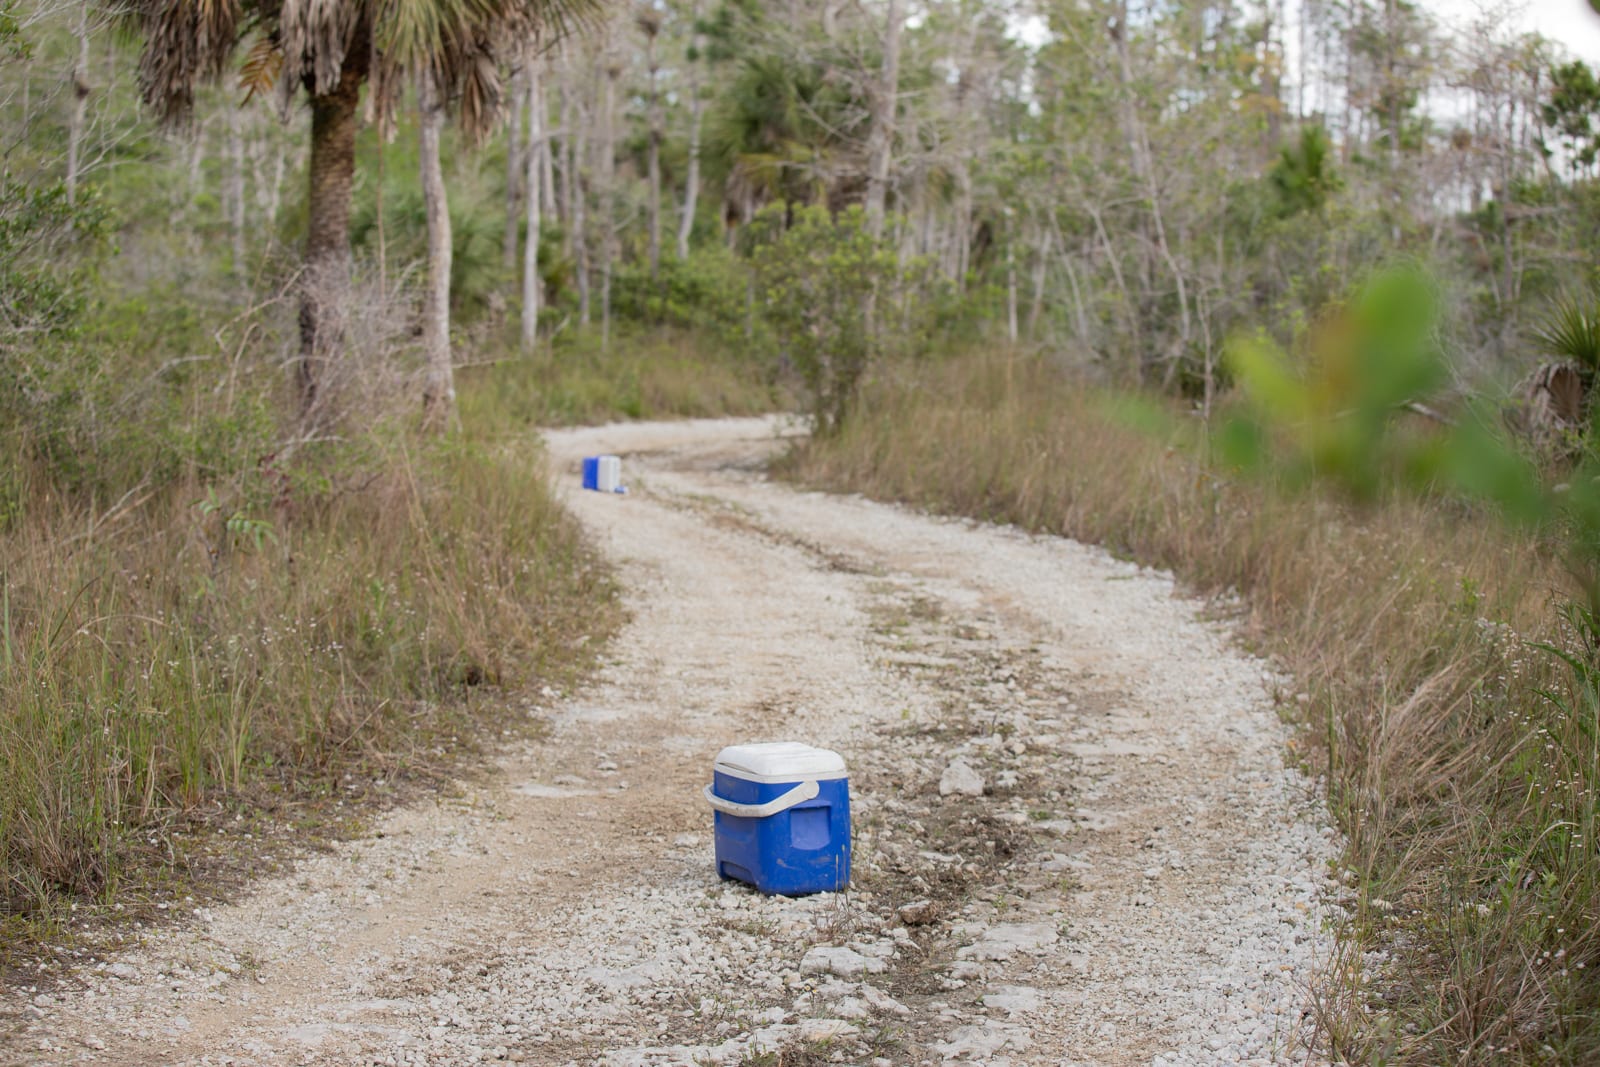 Two abandoned coolers on an Everglades trail